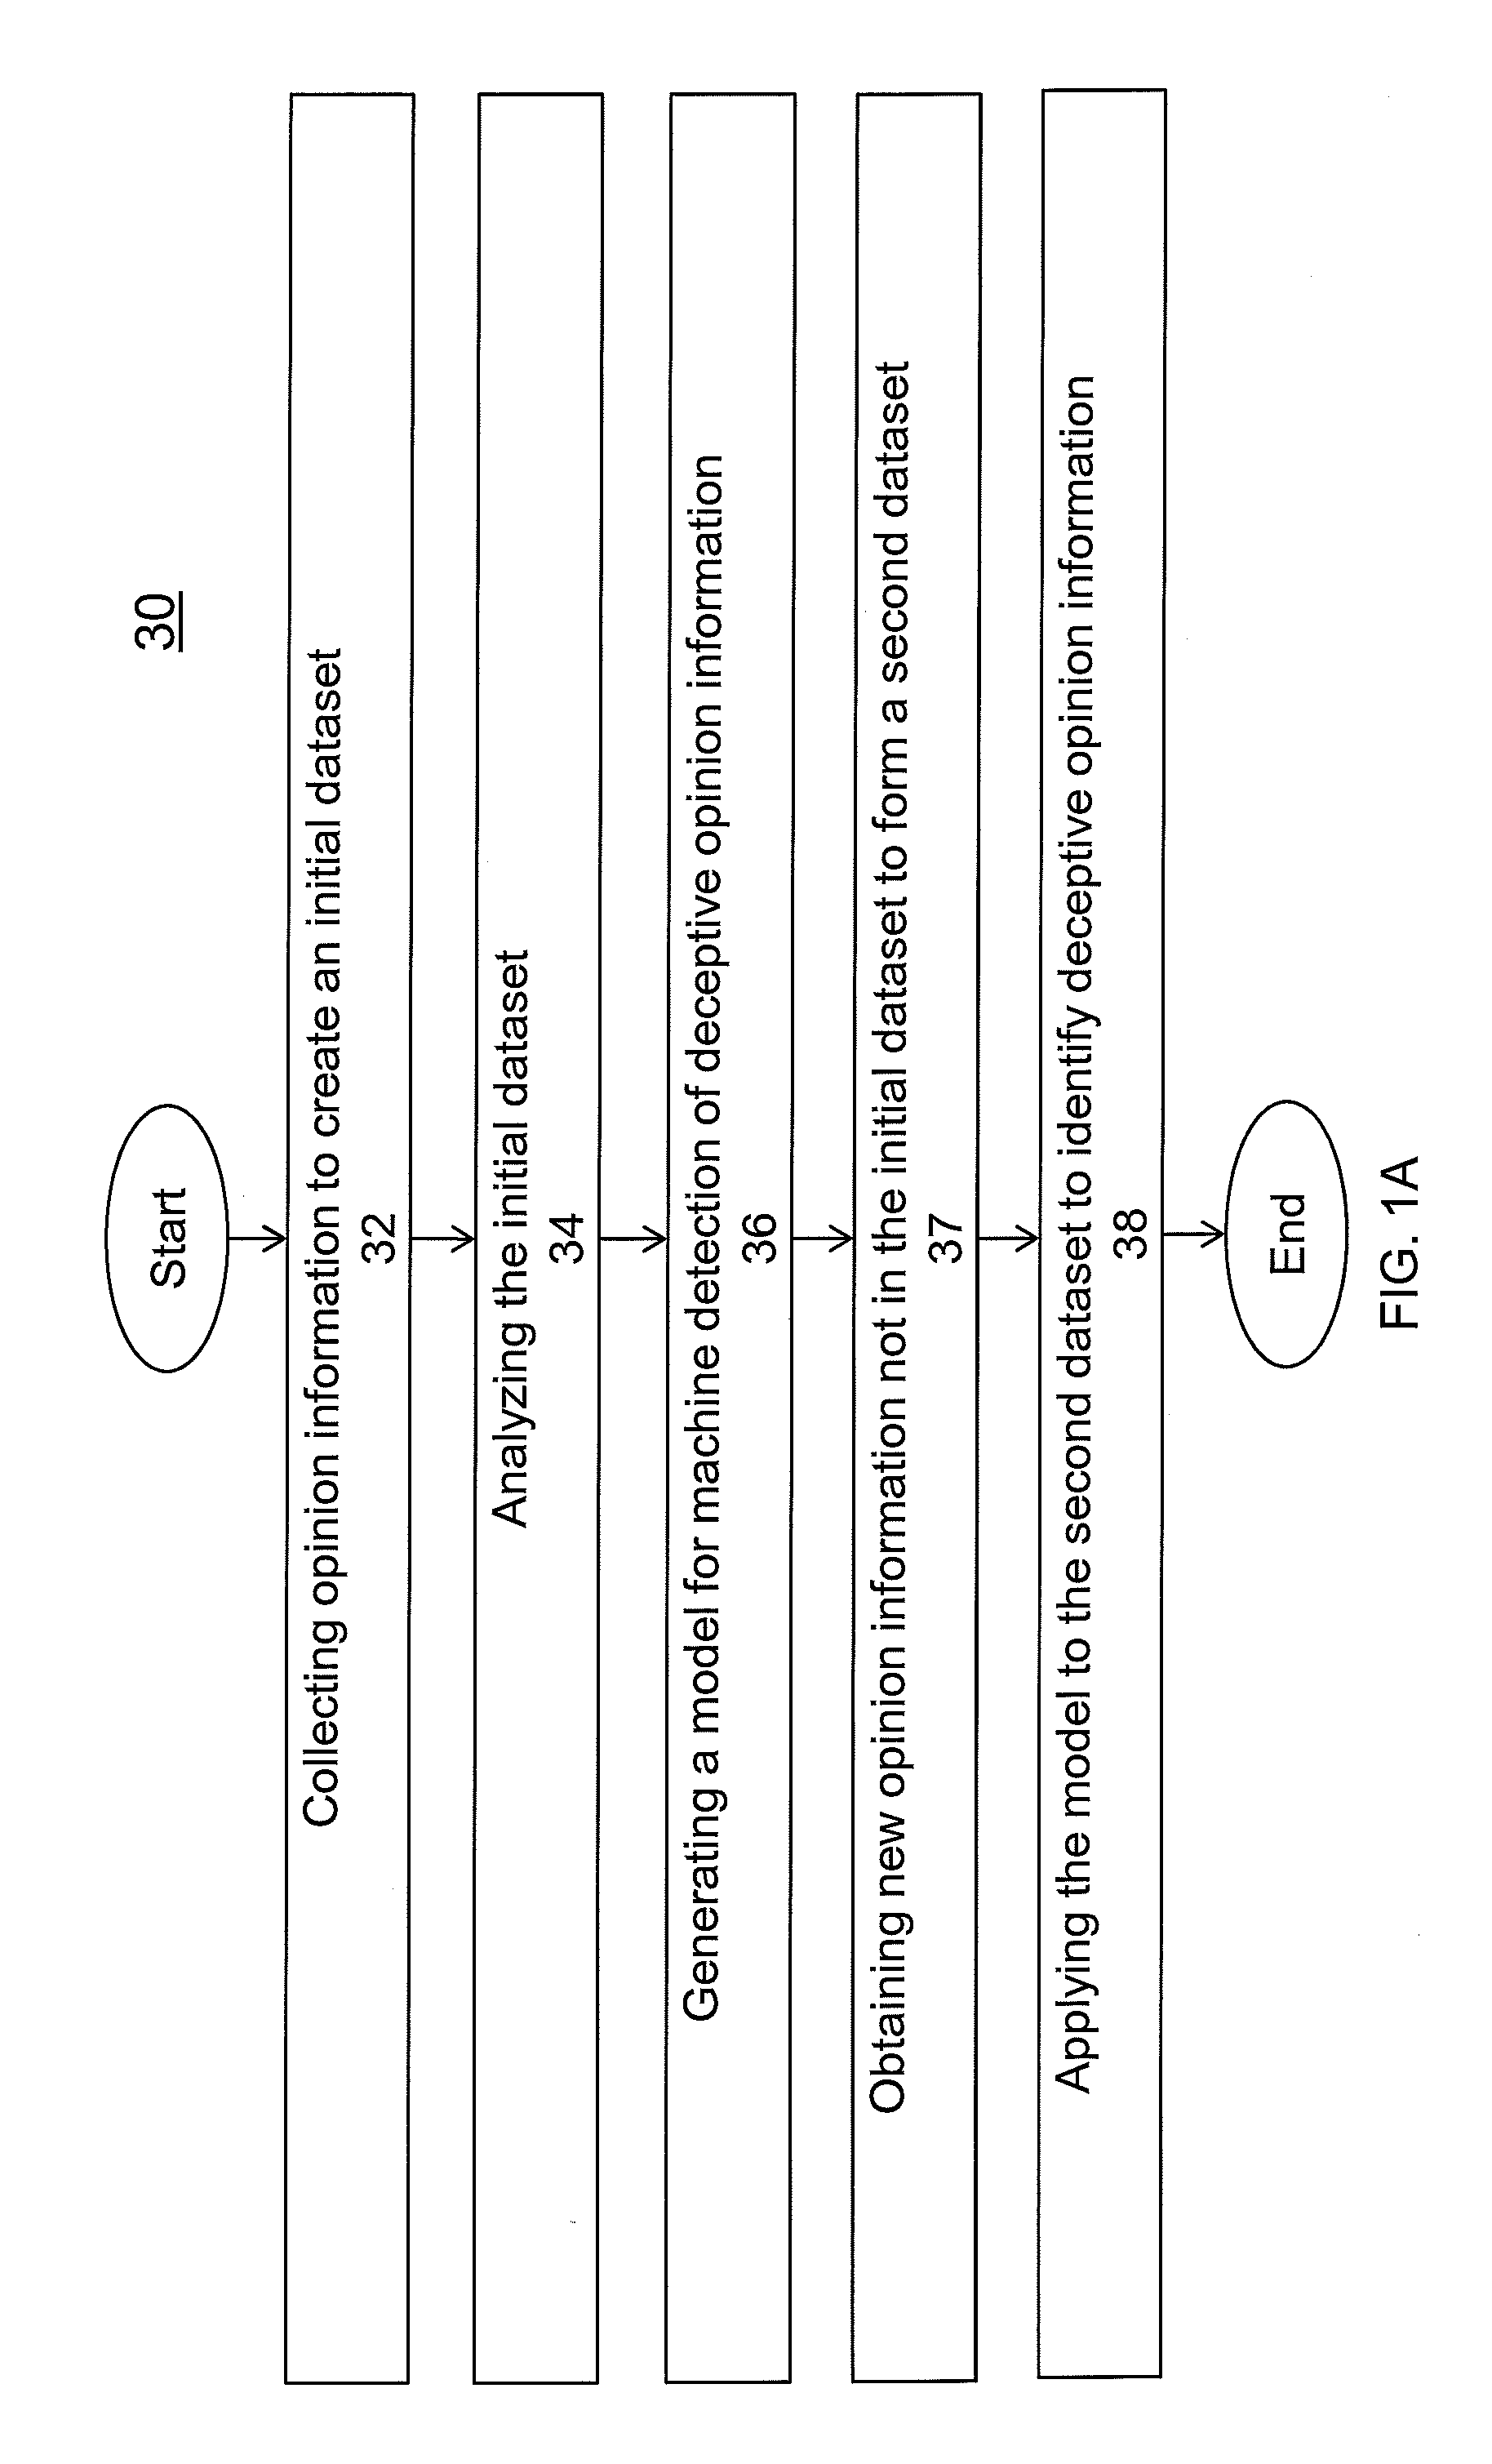 System and methods for automatically detecting deceptive content